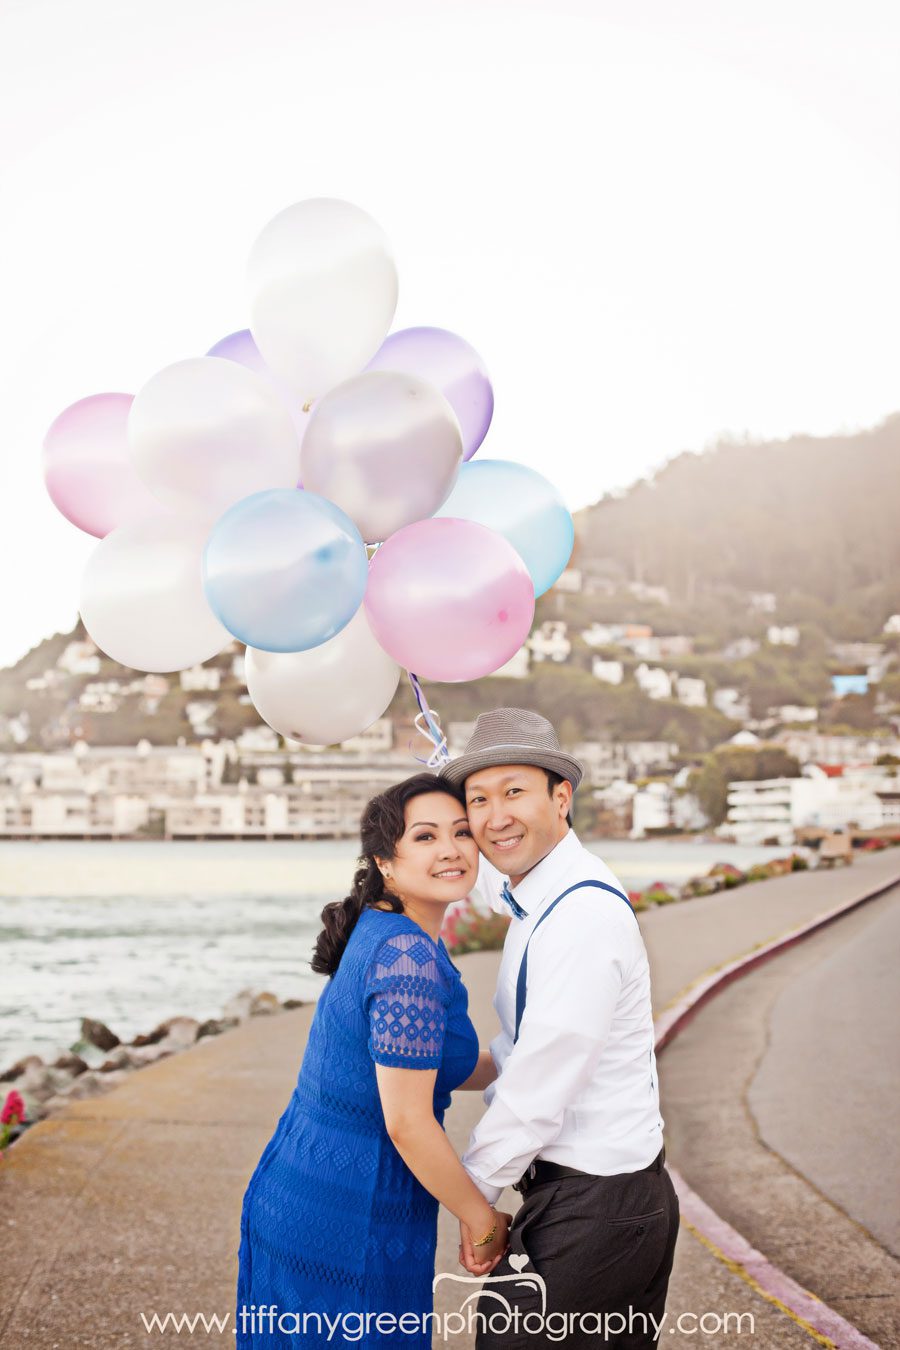 Engagement Portraits with Balloons